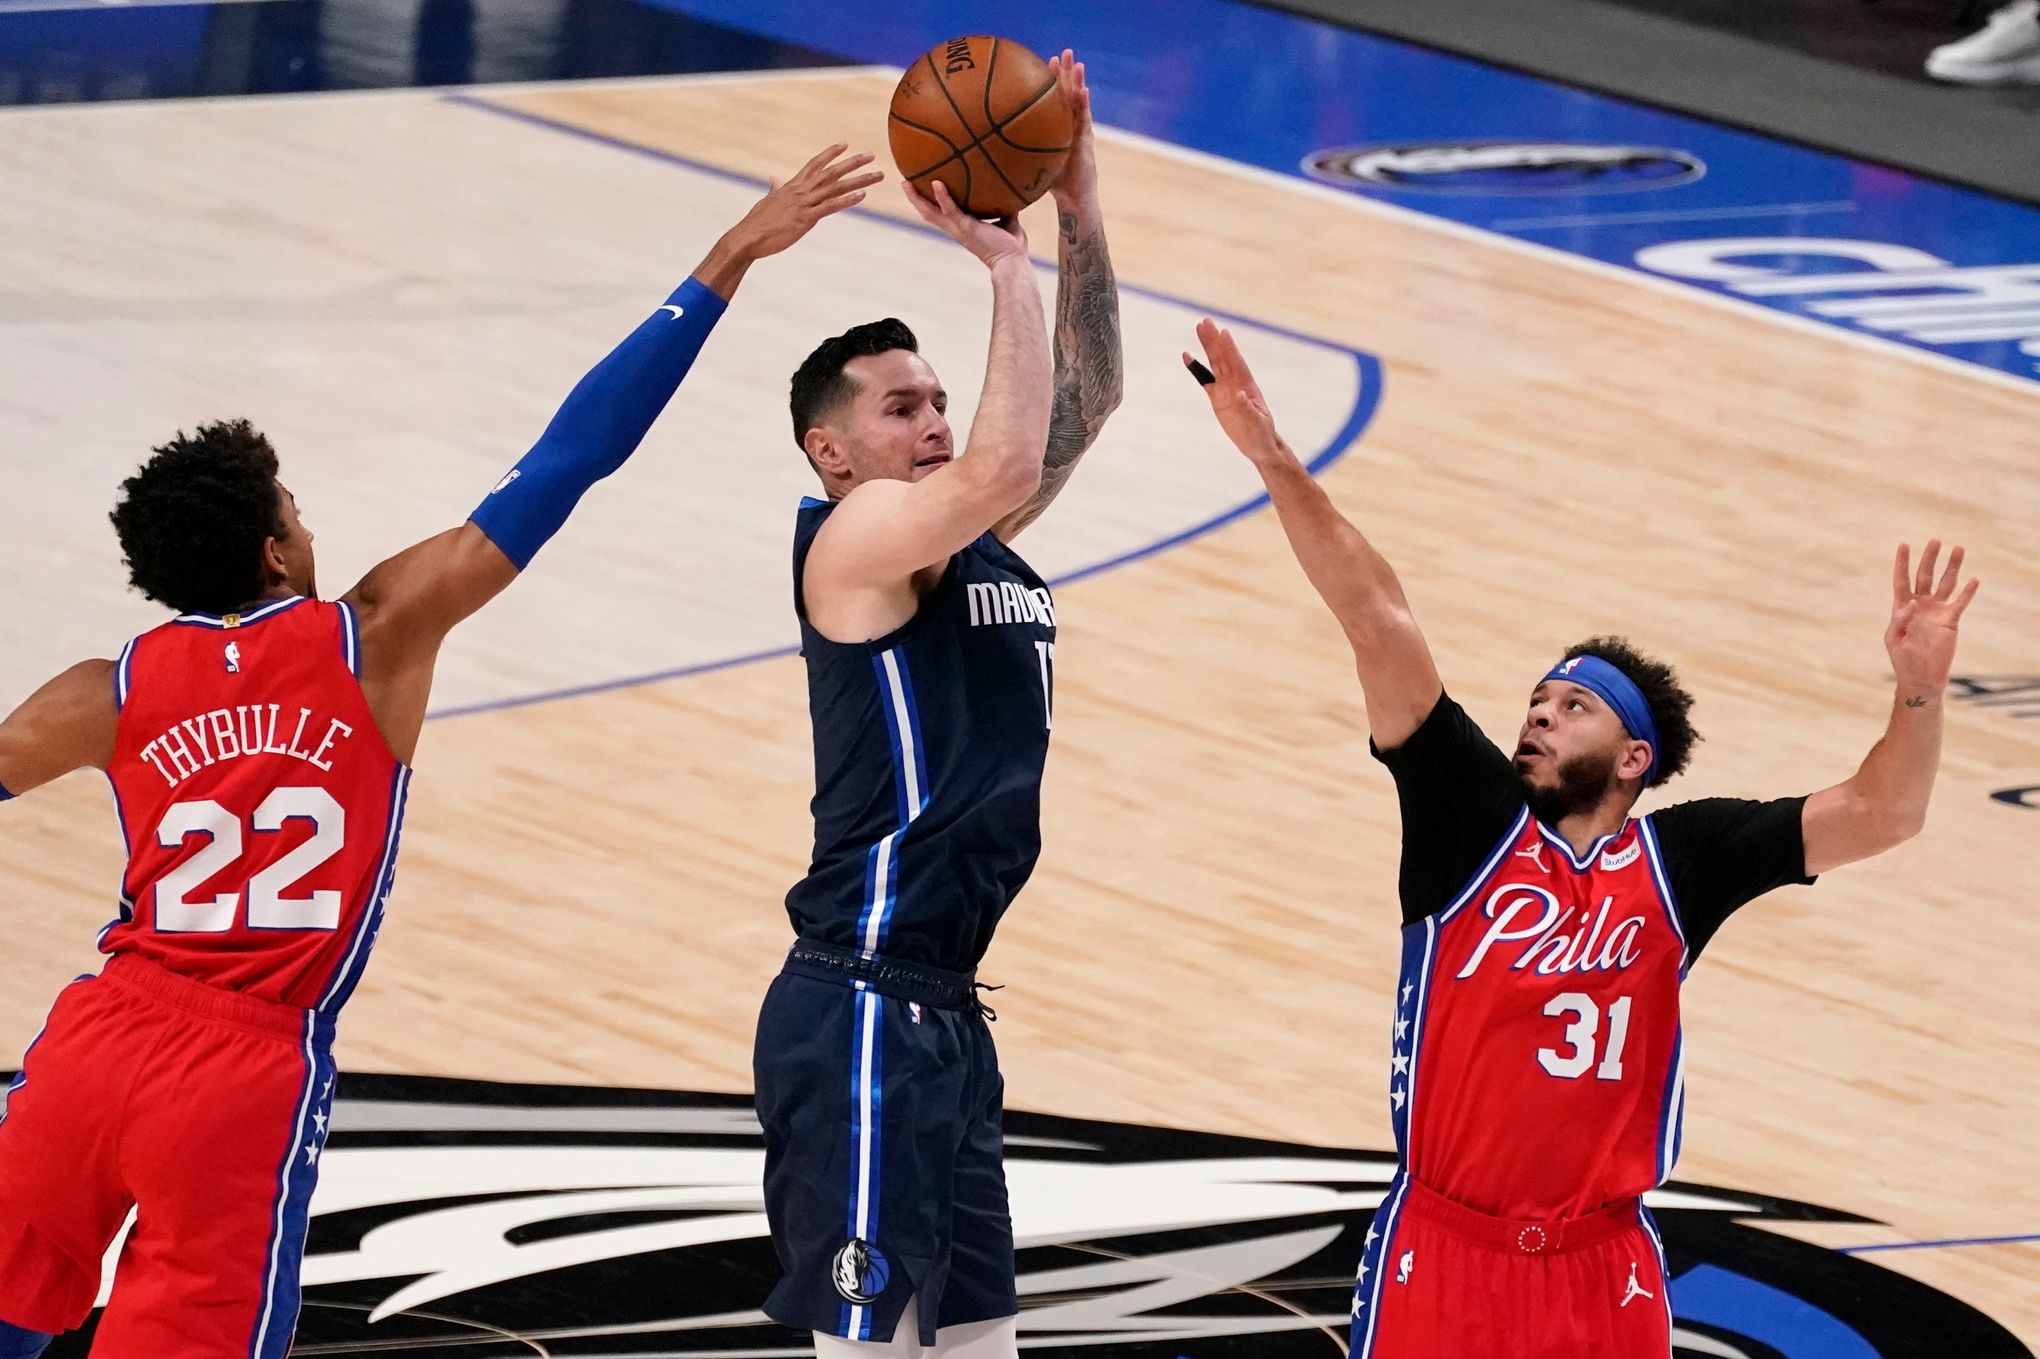 West On JJ Redick: 'What Did He Do That Determined Games?